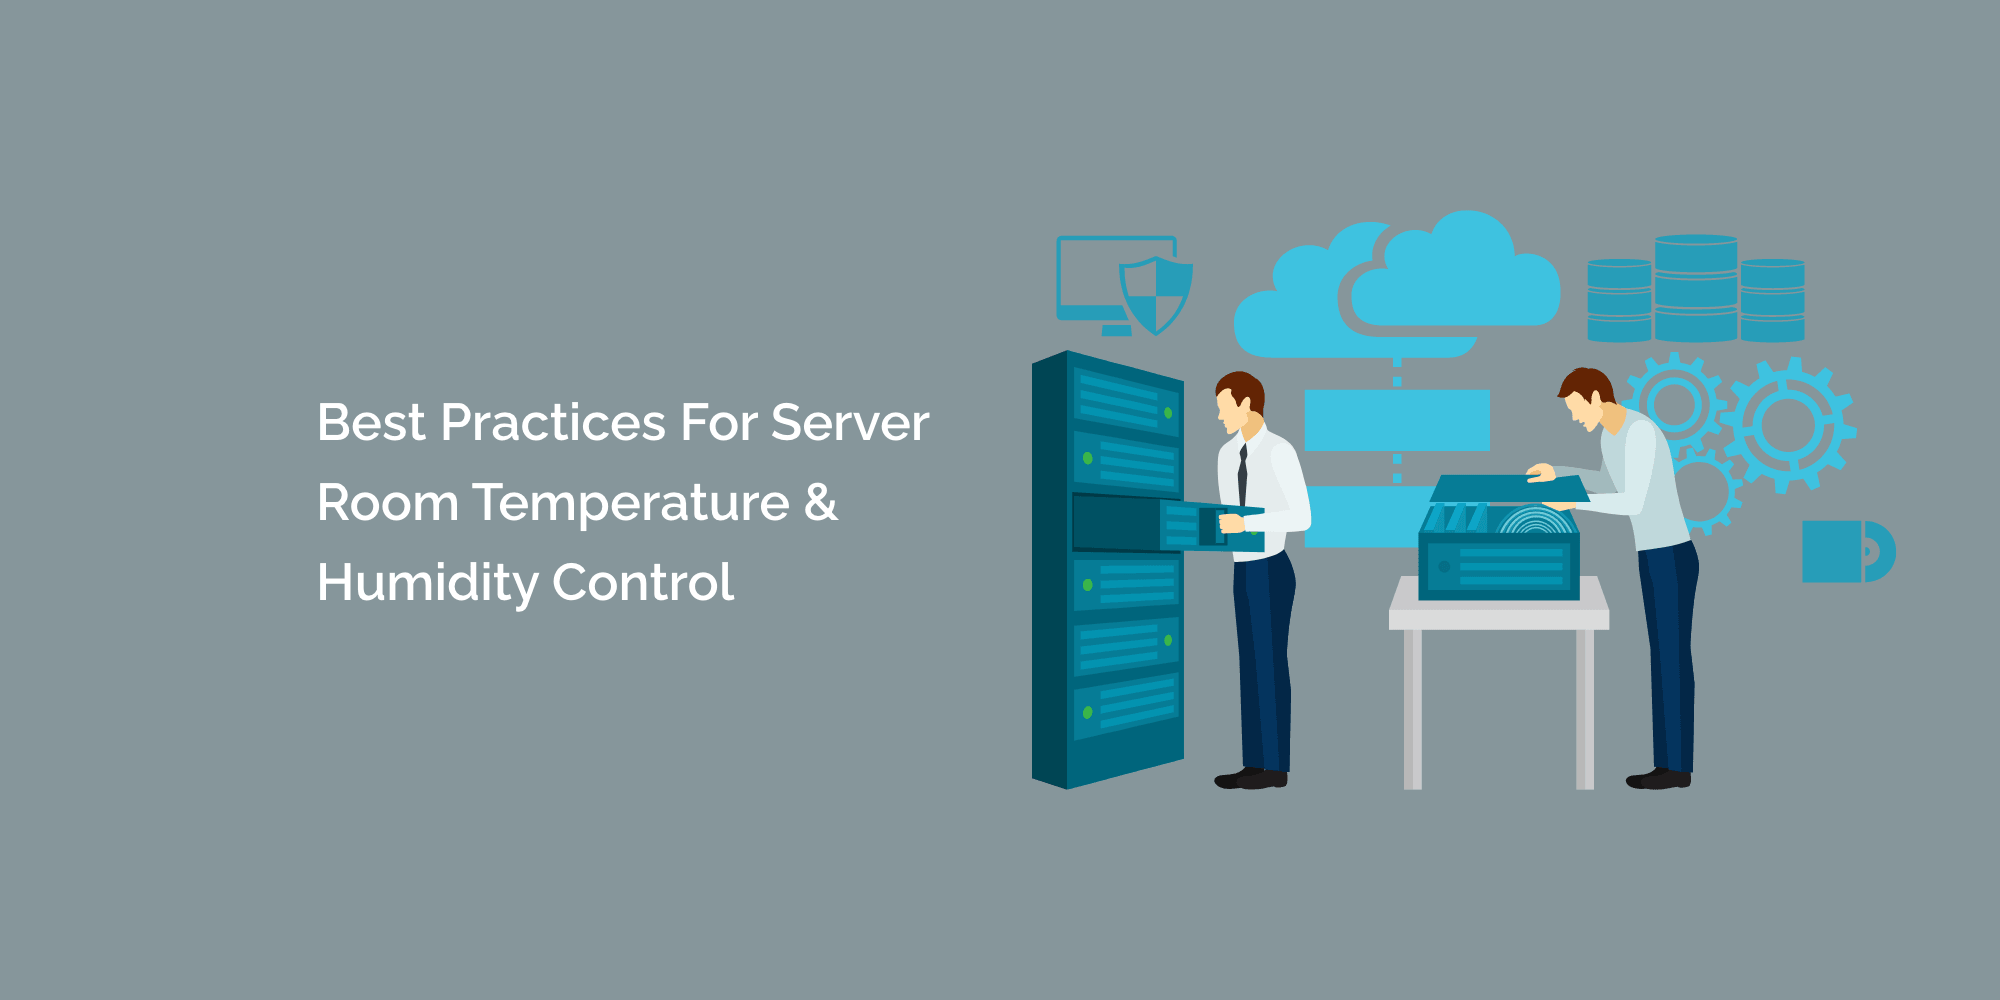 Best Practices for Server Room Temperature & Humidity Control